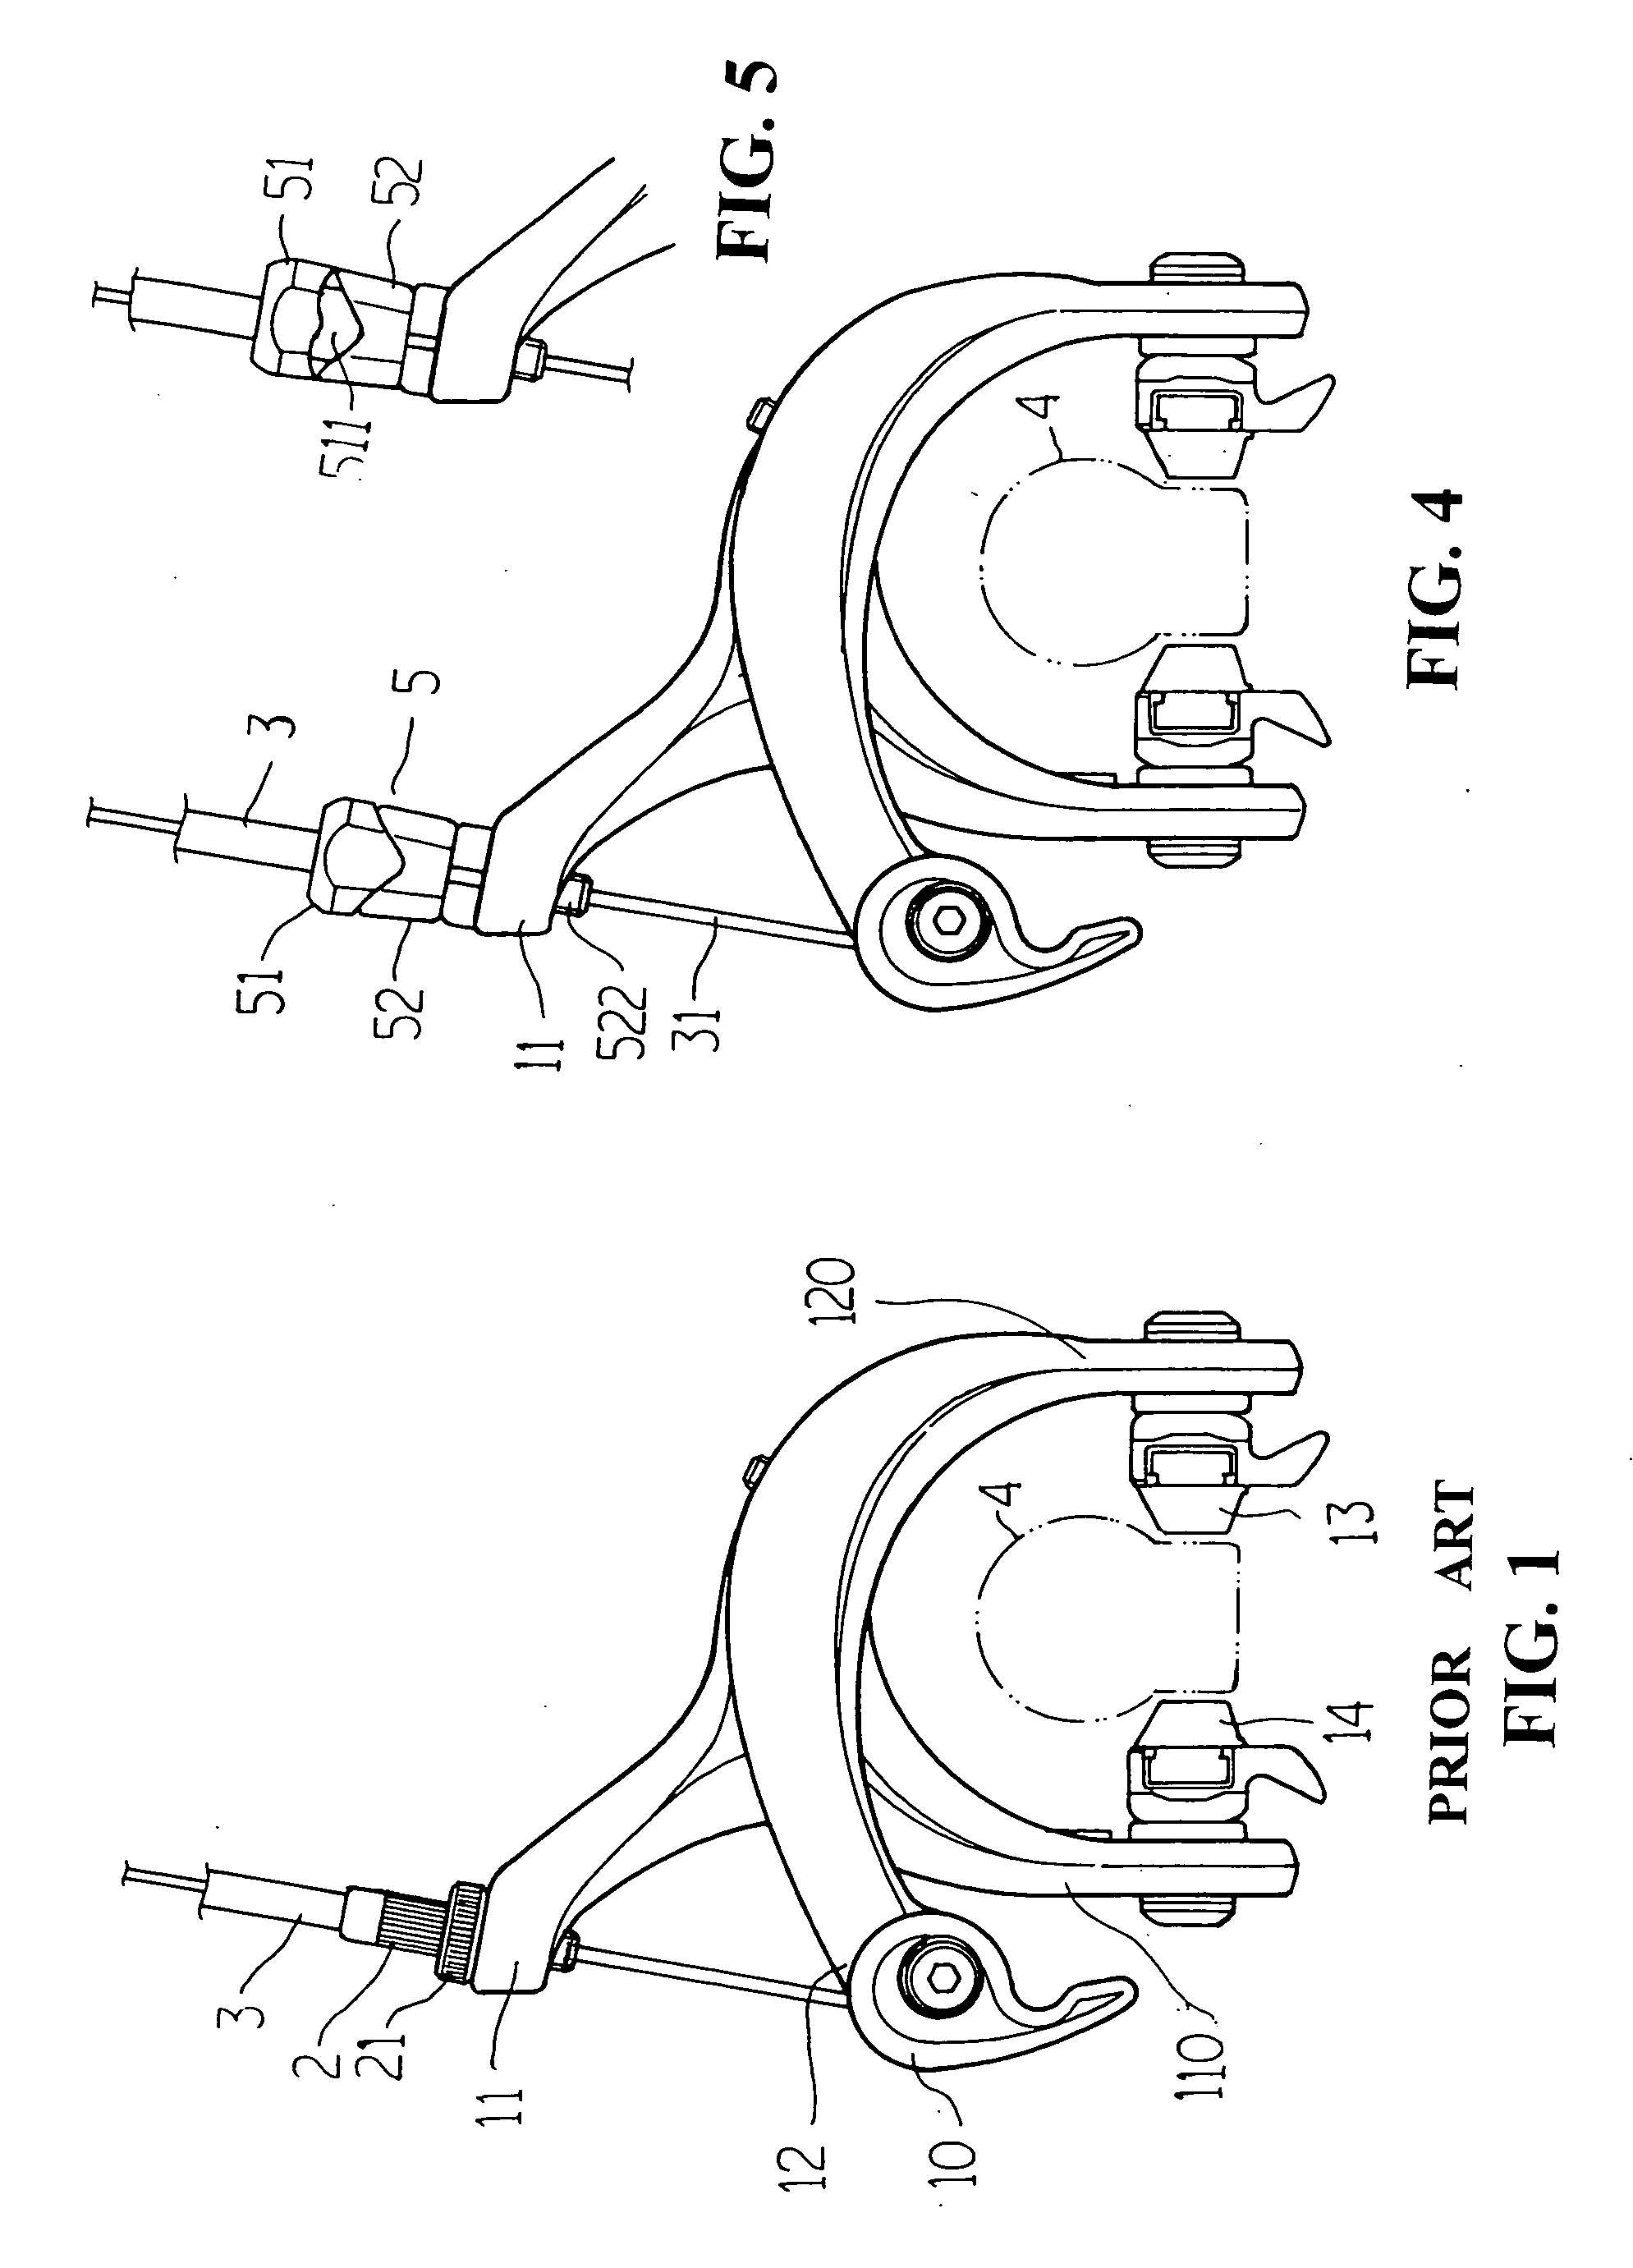 Device for tightening and loosening bicycle brake wire